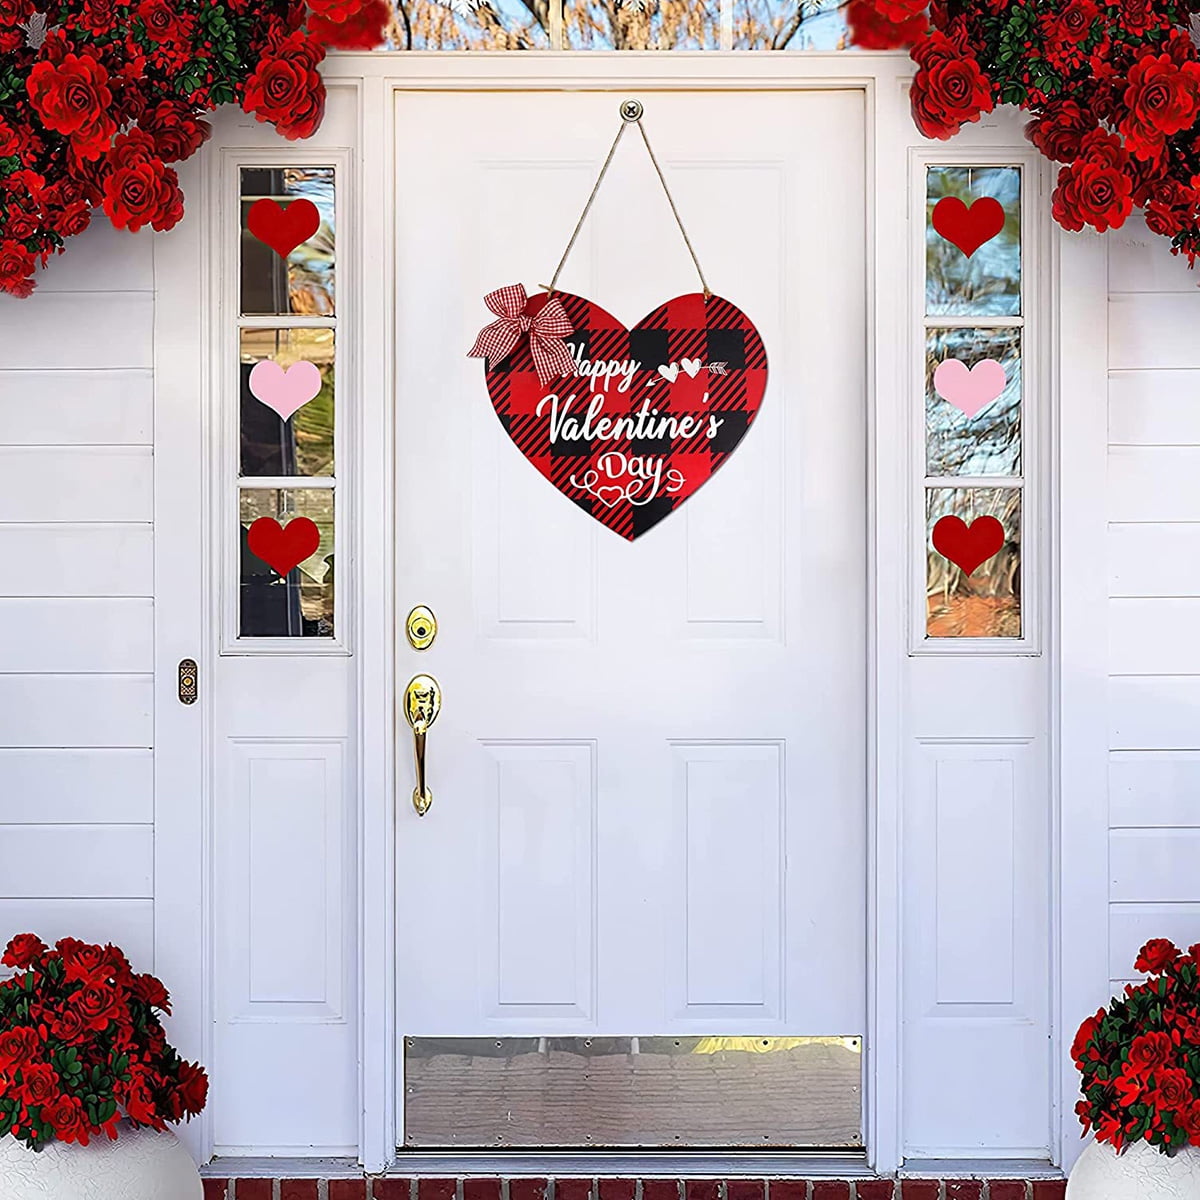 Duety Non Fading Heart Shaped Door Decoration Red And Black Plaid Wall Plaque Valentines Day Decorations Wooden Front Decor For Home Com